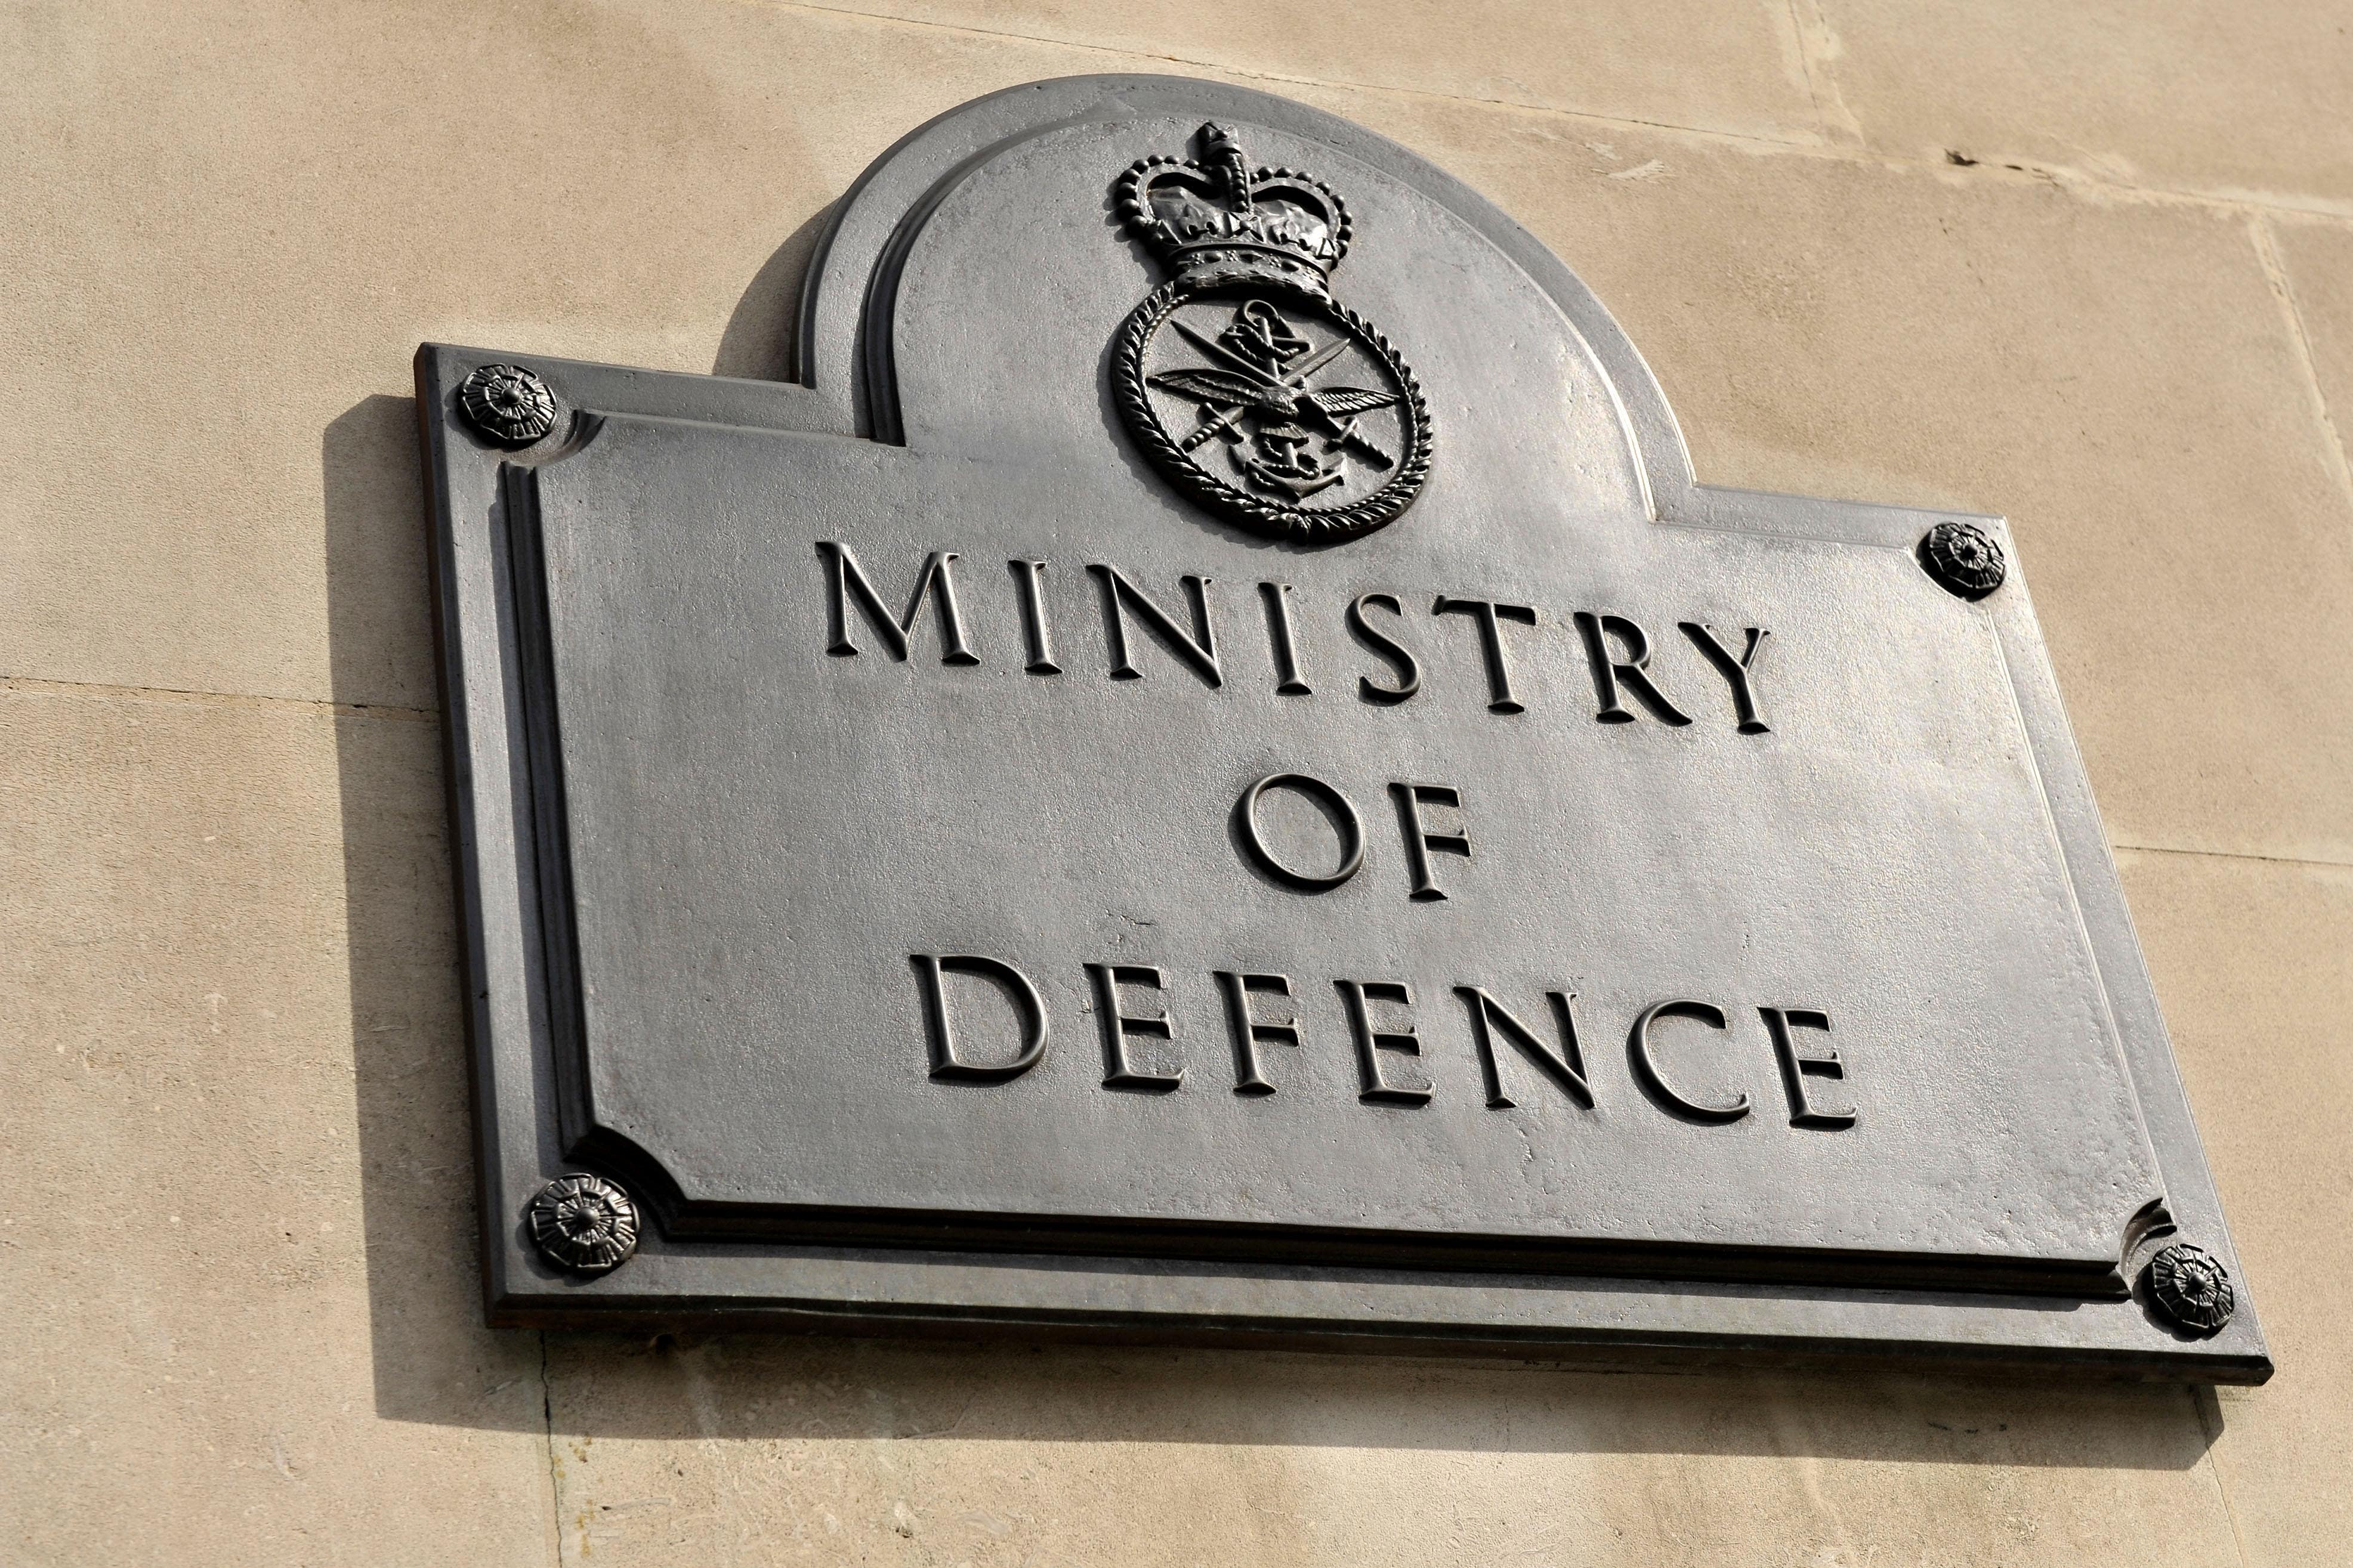 The site is part of the Ministry of Defence (PA)